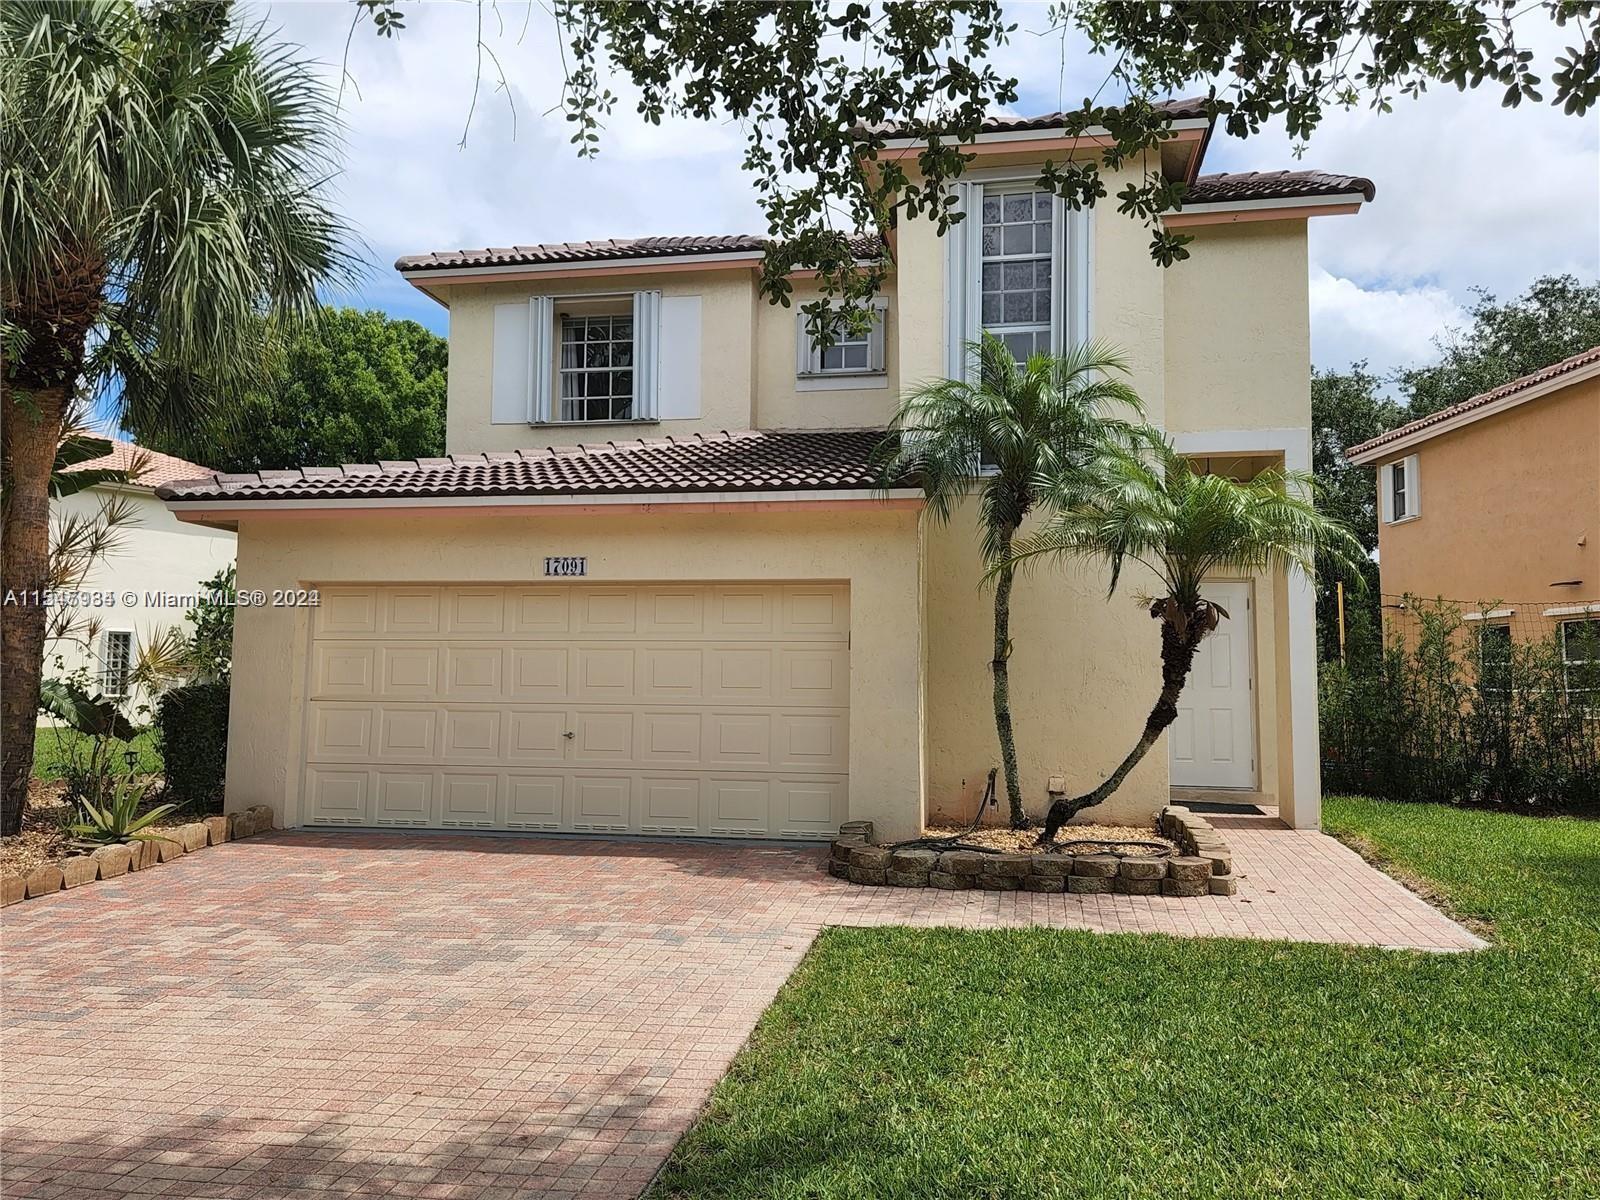 Photo of 17091 NW 13th St in Pembroke Pines, FL